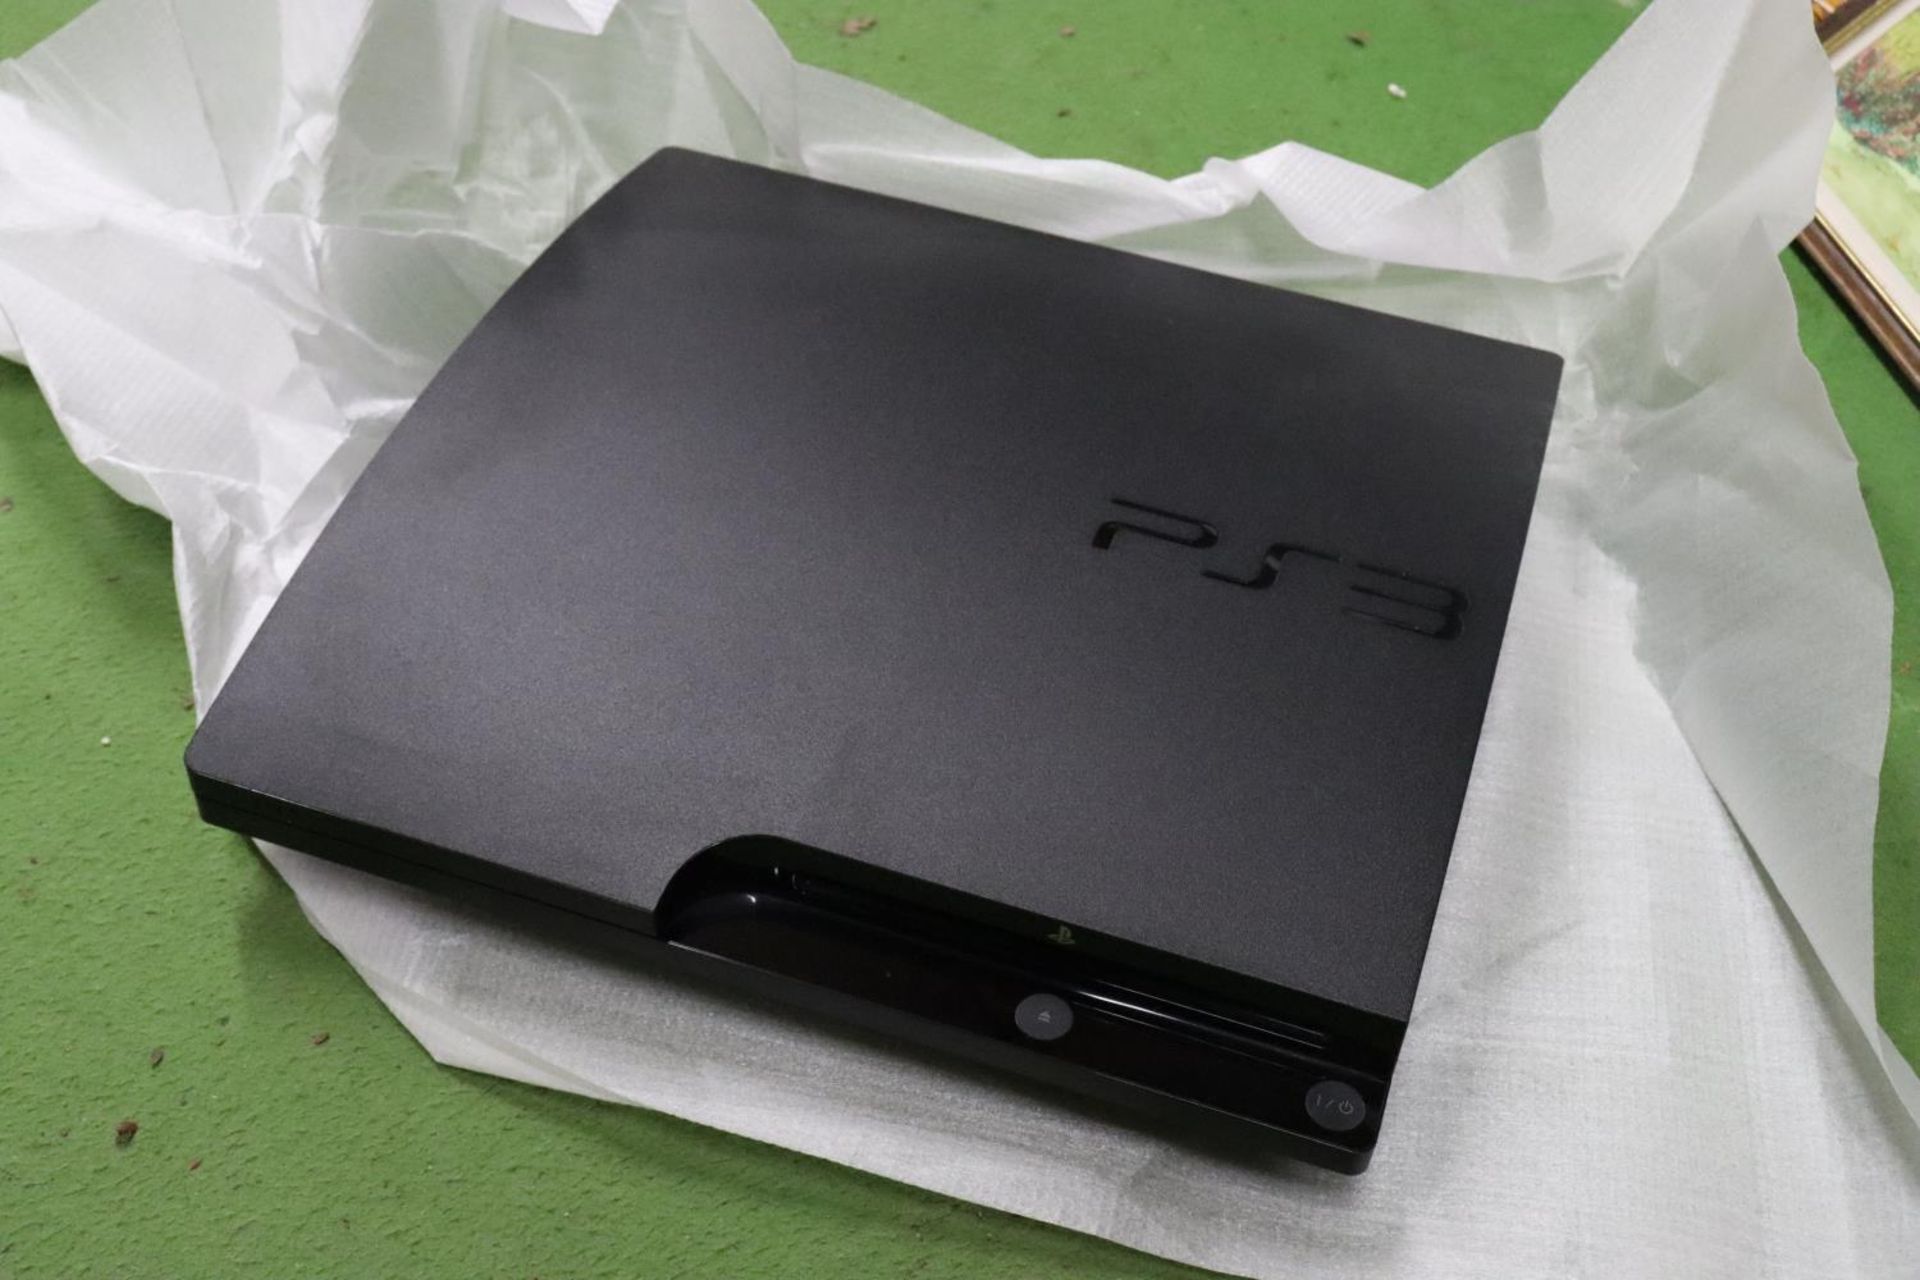 A BOXED PLAYSTATION 3, 160 GB WITH A CONTROLLER AND POWER CABLE - Image 3 of 5